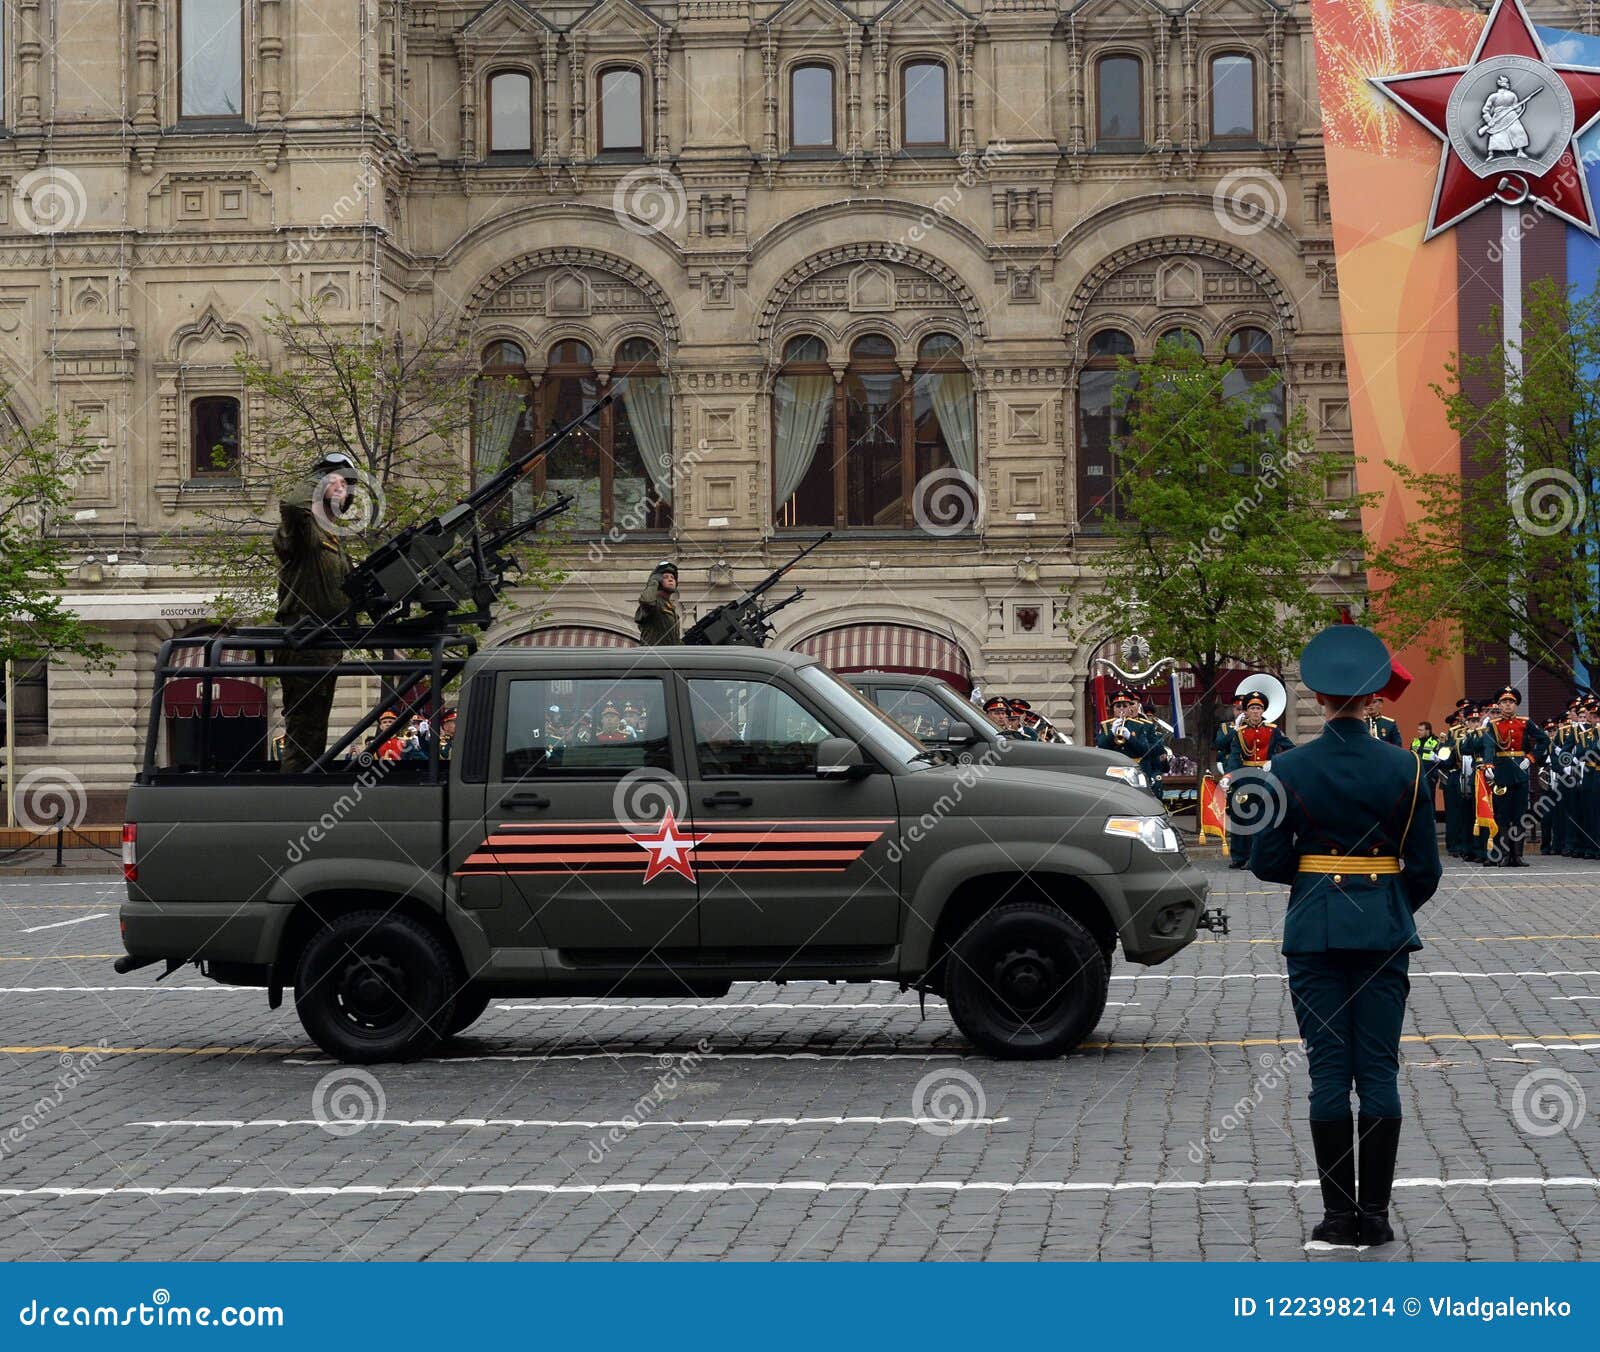 army-pickup-uaz-five-seater-cab-two-machine-guns-dress-rehearsal-victory-day-parade-moscow-russia-may-122398214.jpg